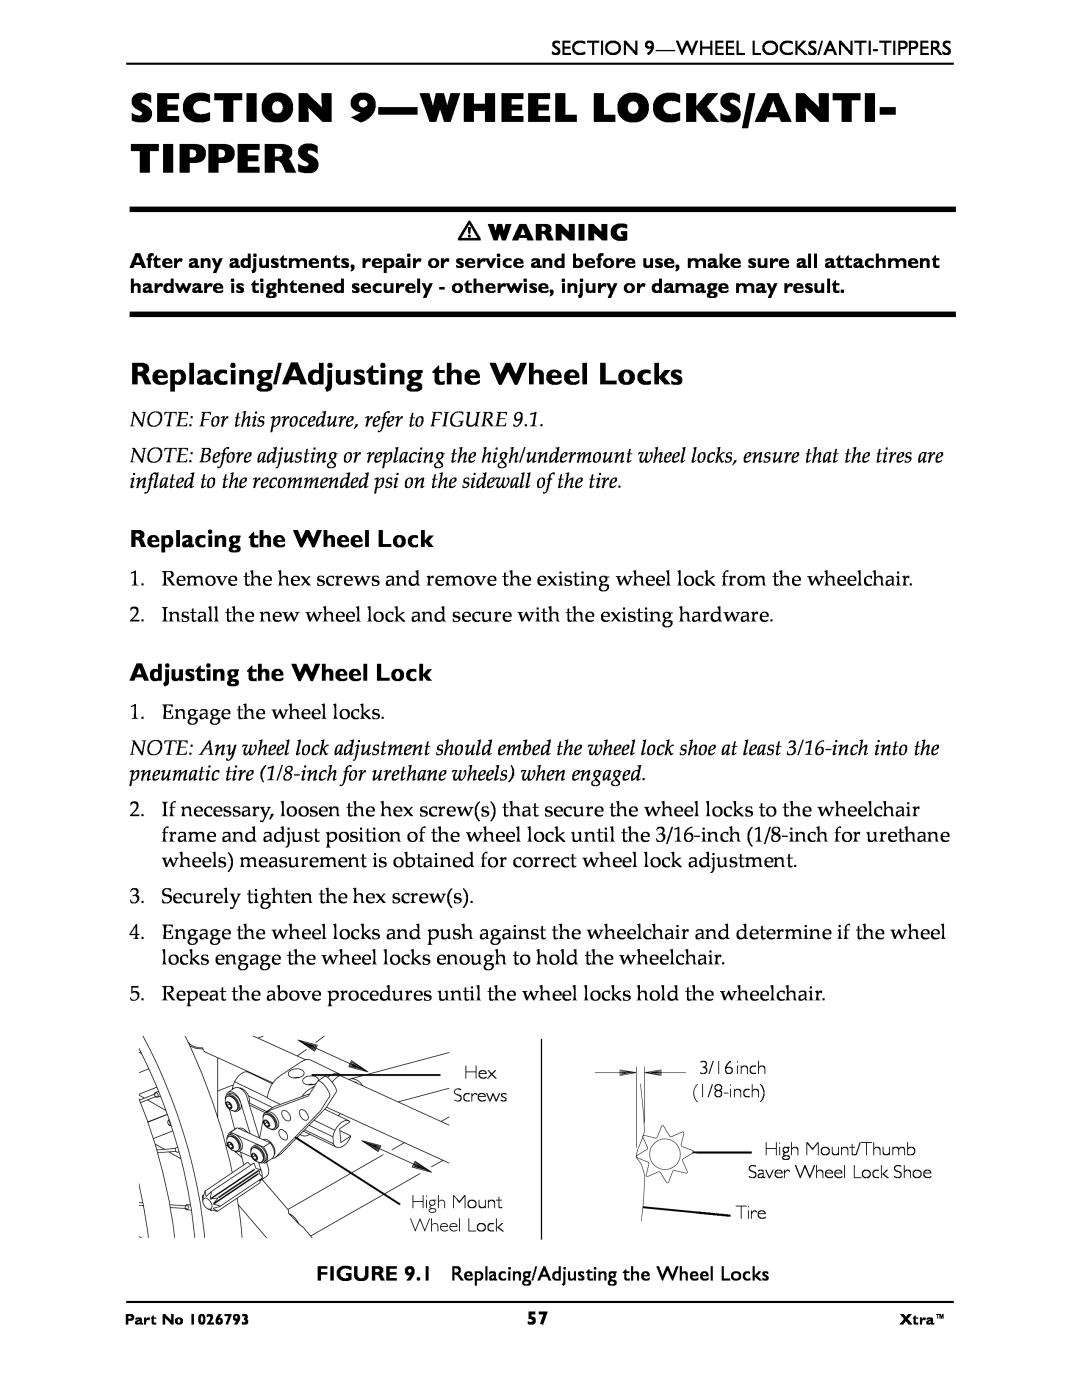 Invacare 1026793 Wheel Locks/Anti- Tippers, Replacing/Adjusting the Wheel Locks, NOTE For this procedure, refer to FIGURE 